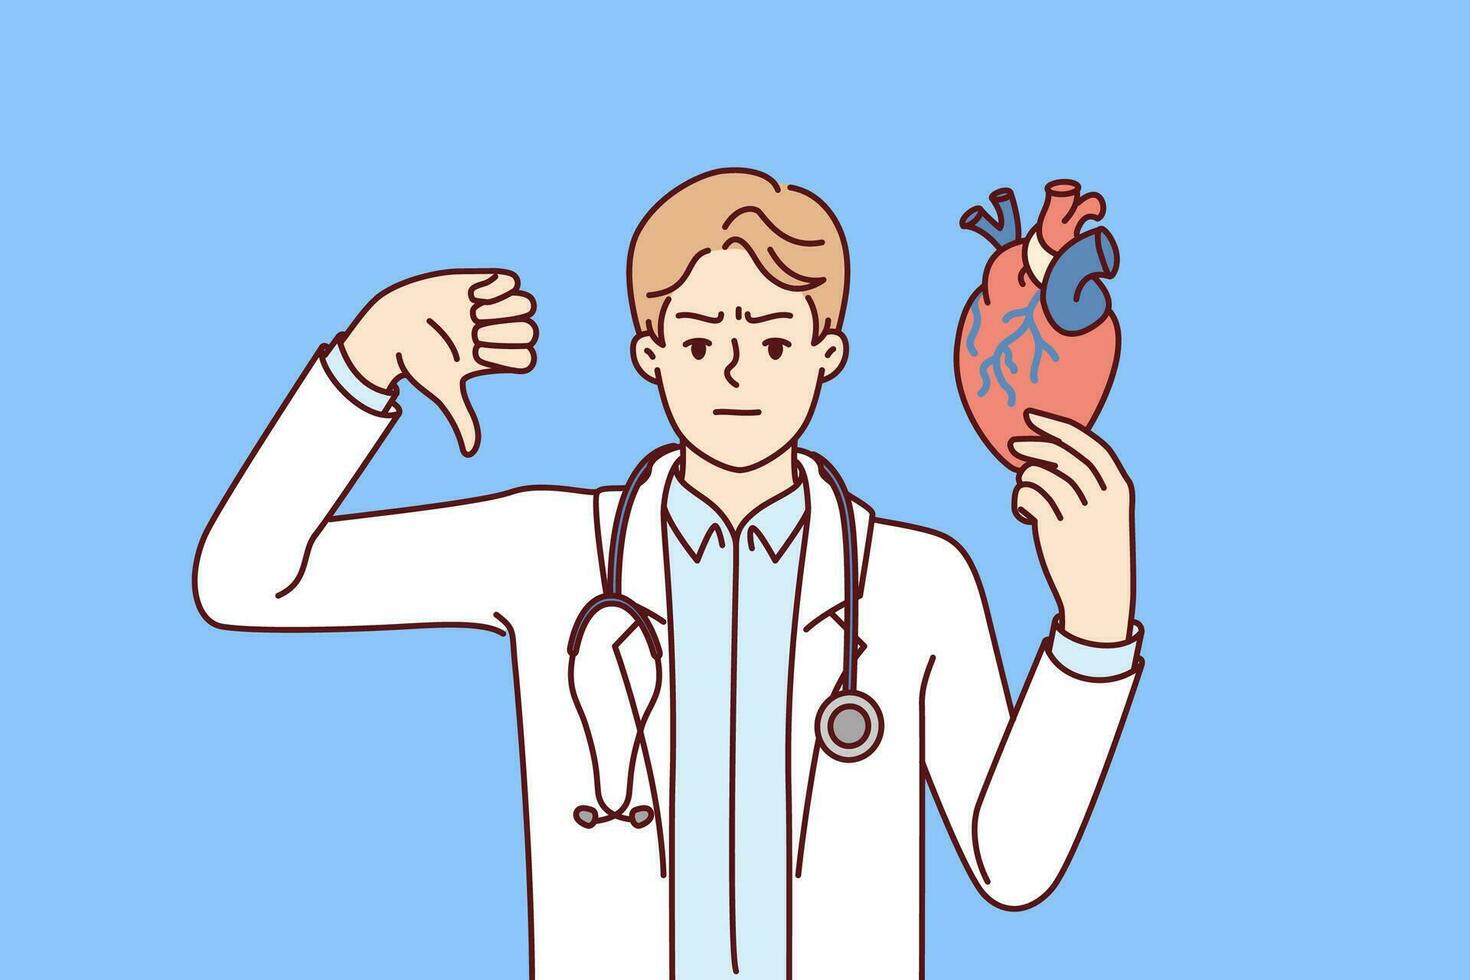 Man doctor for heart disease showing thumb down recommending taking medication or leading healthy lifestyle. Concept negative cardiac tests for patient and poor health of heart and circulatory system vector